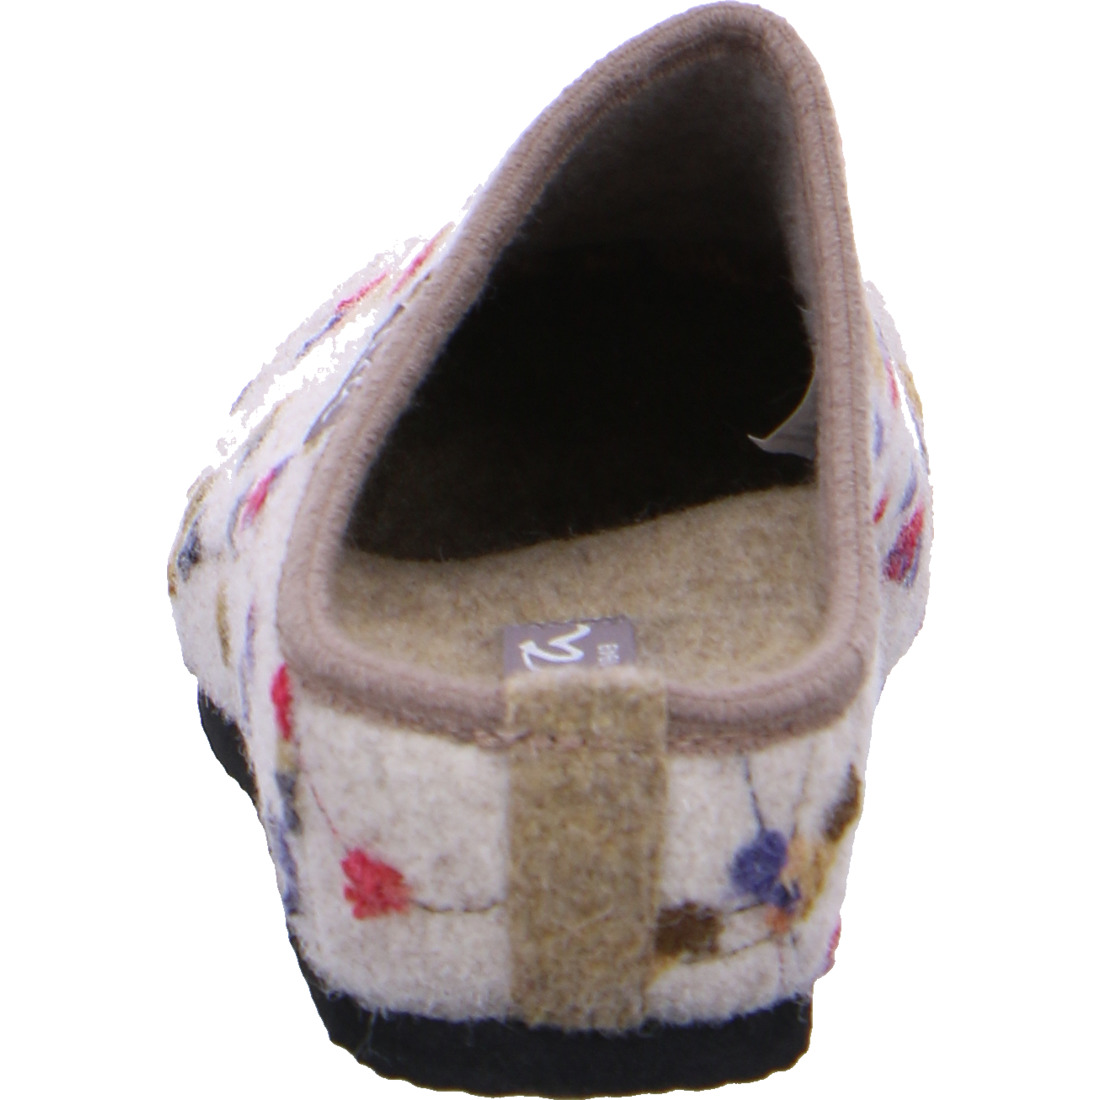 Chaussons*Ara Shoes Chaussons Chaussons Cosy